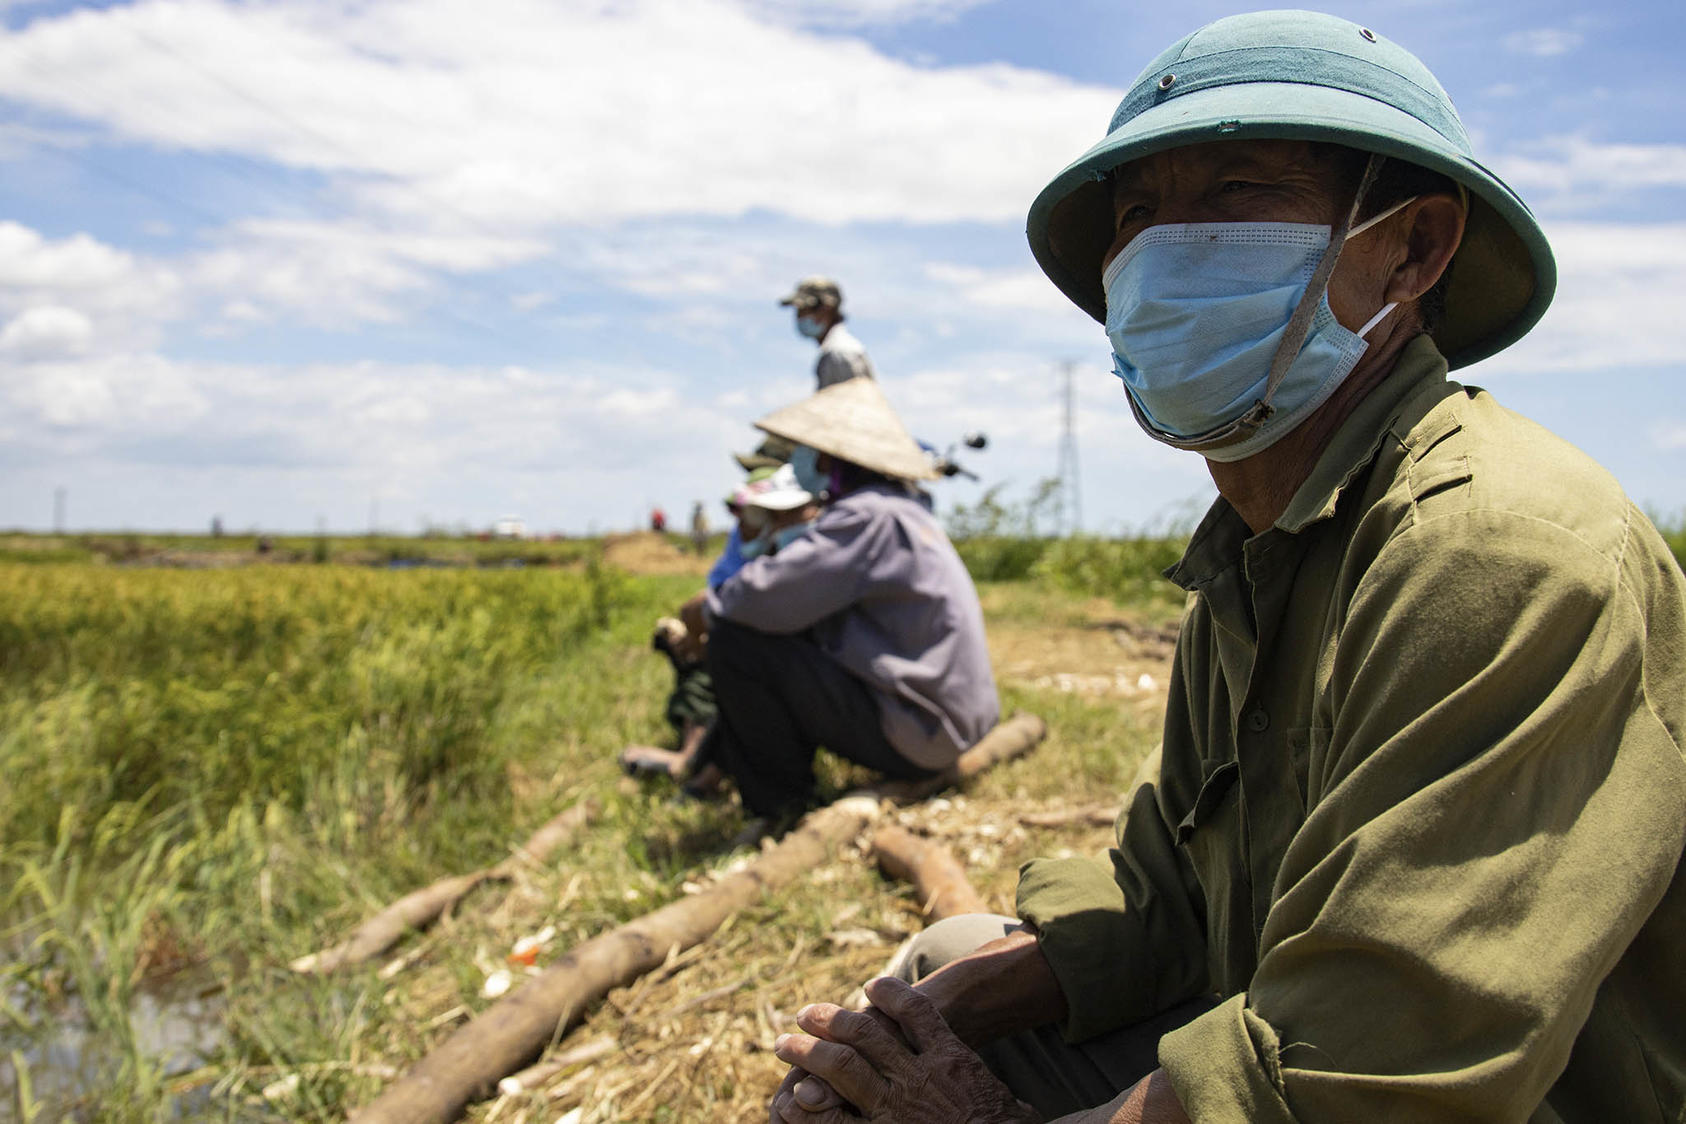 Vietnamese locals take a break from transporting dirt during a U.S.-led recovery mission in Quang Binh province, Vietnam. June 15, 2021. (Lance Cpl. Timothy Fowler/U.S. Marine Corps)